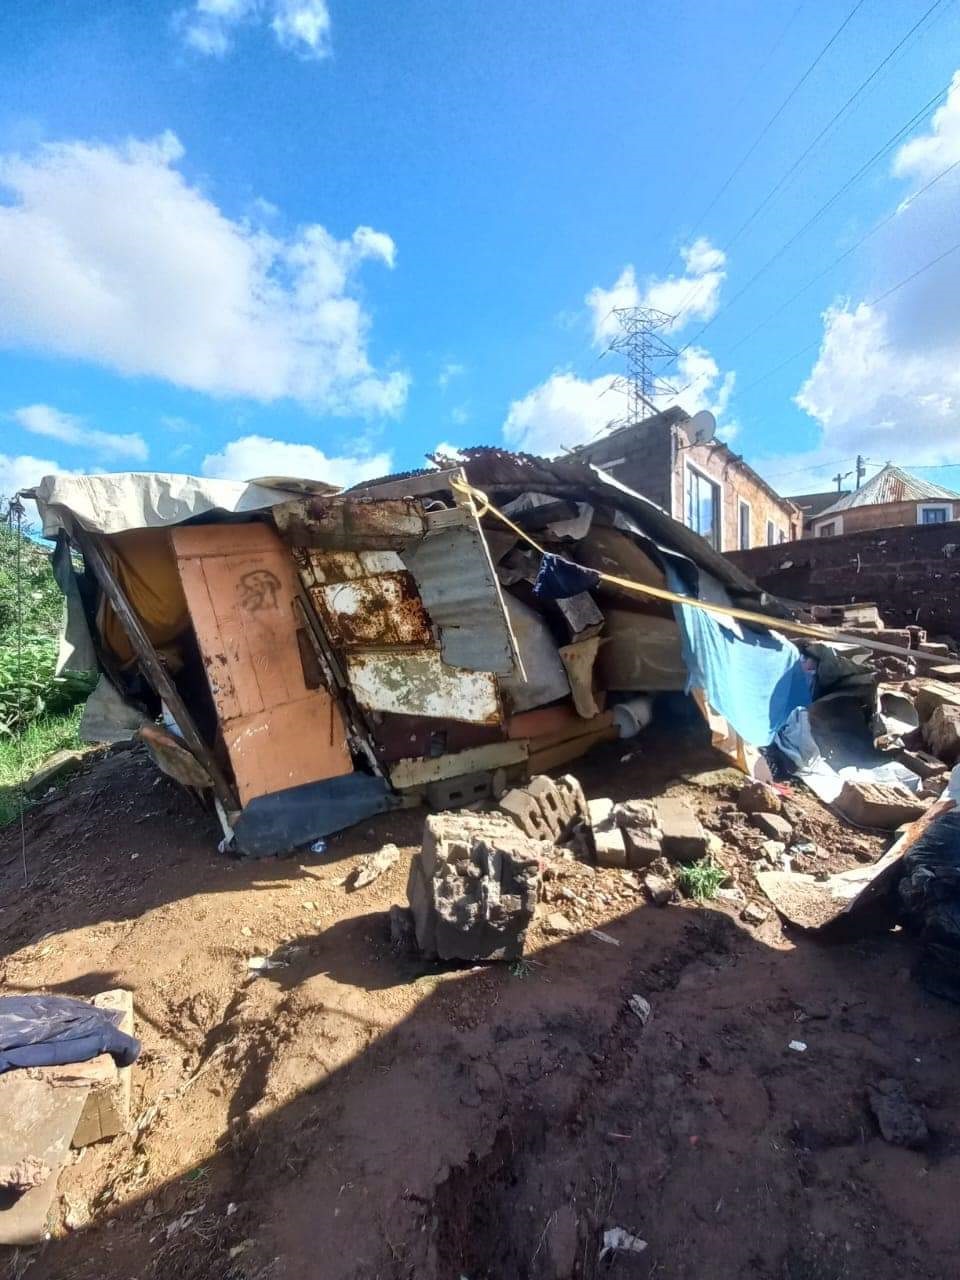 The shack of the gogo that collapsed while she was sleeping with her grandchild and killed them both. Photo Supplied
